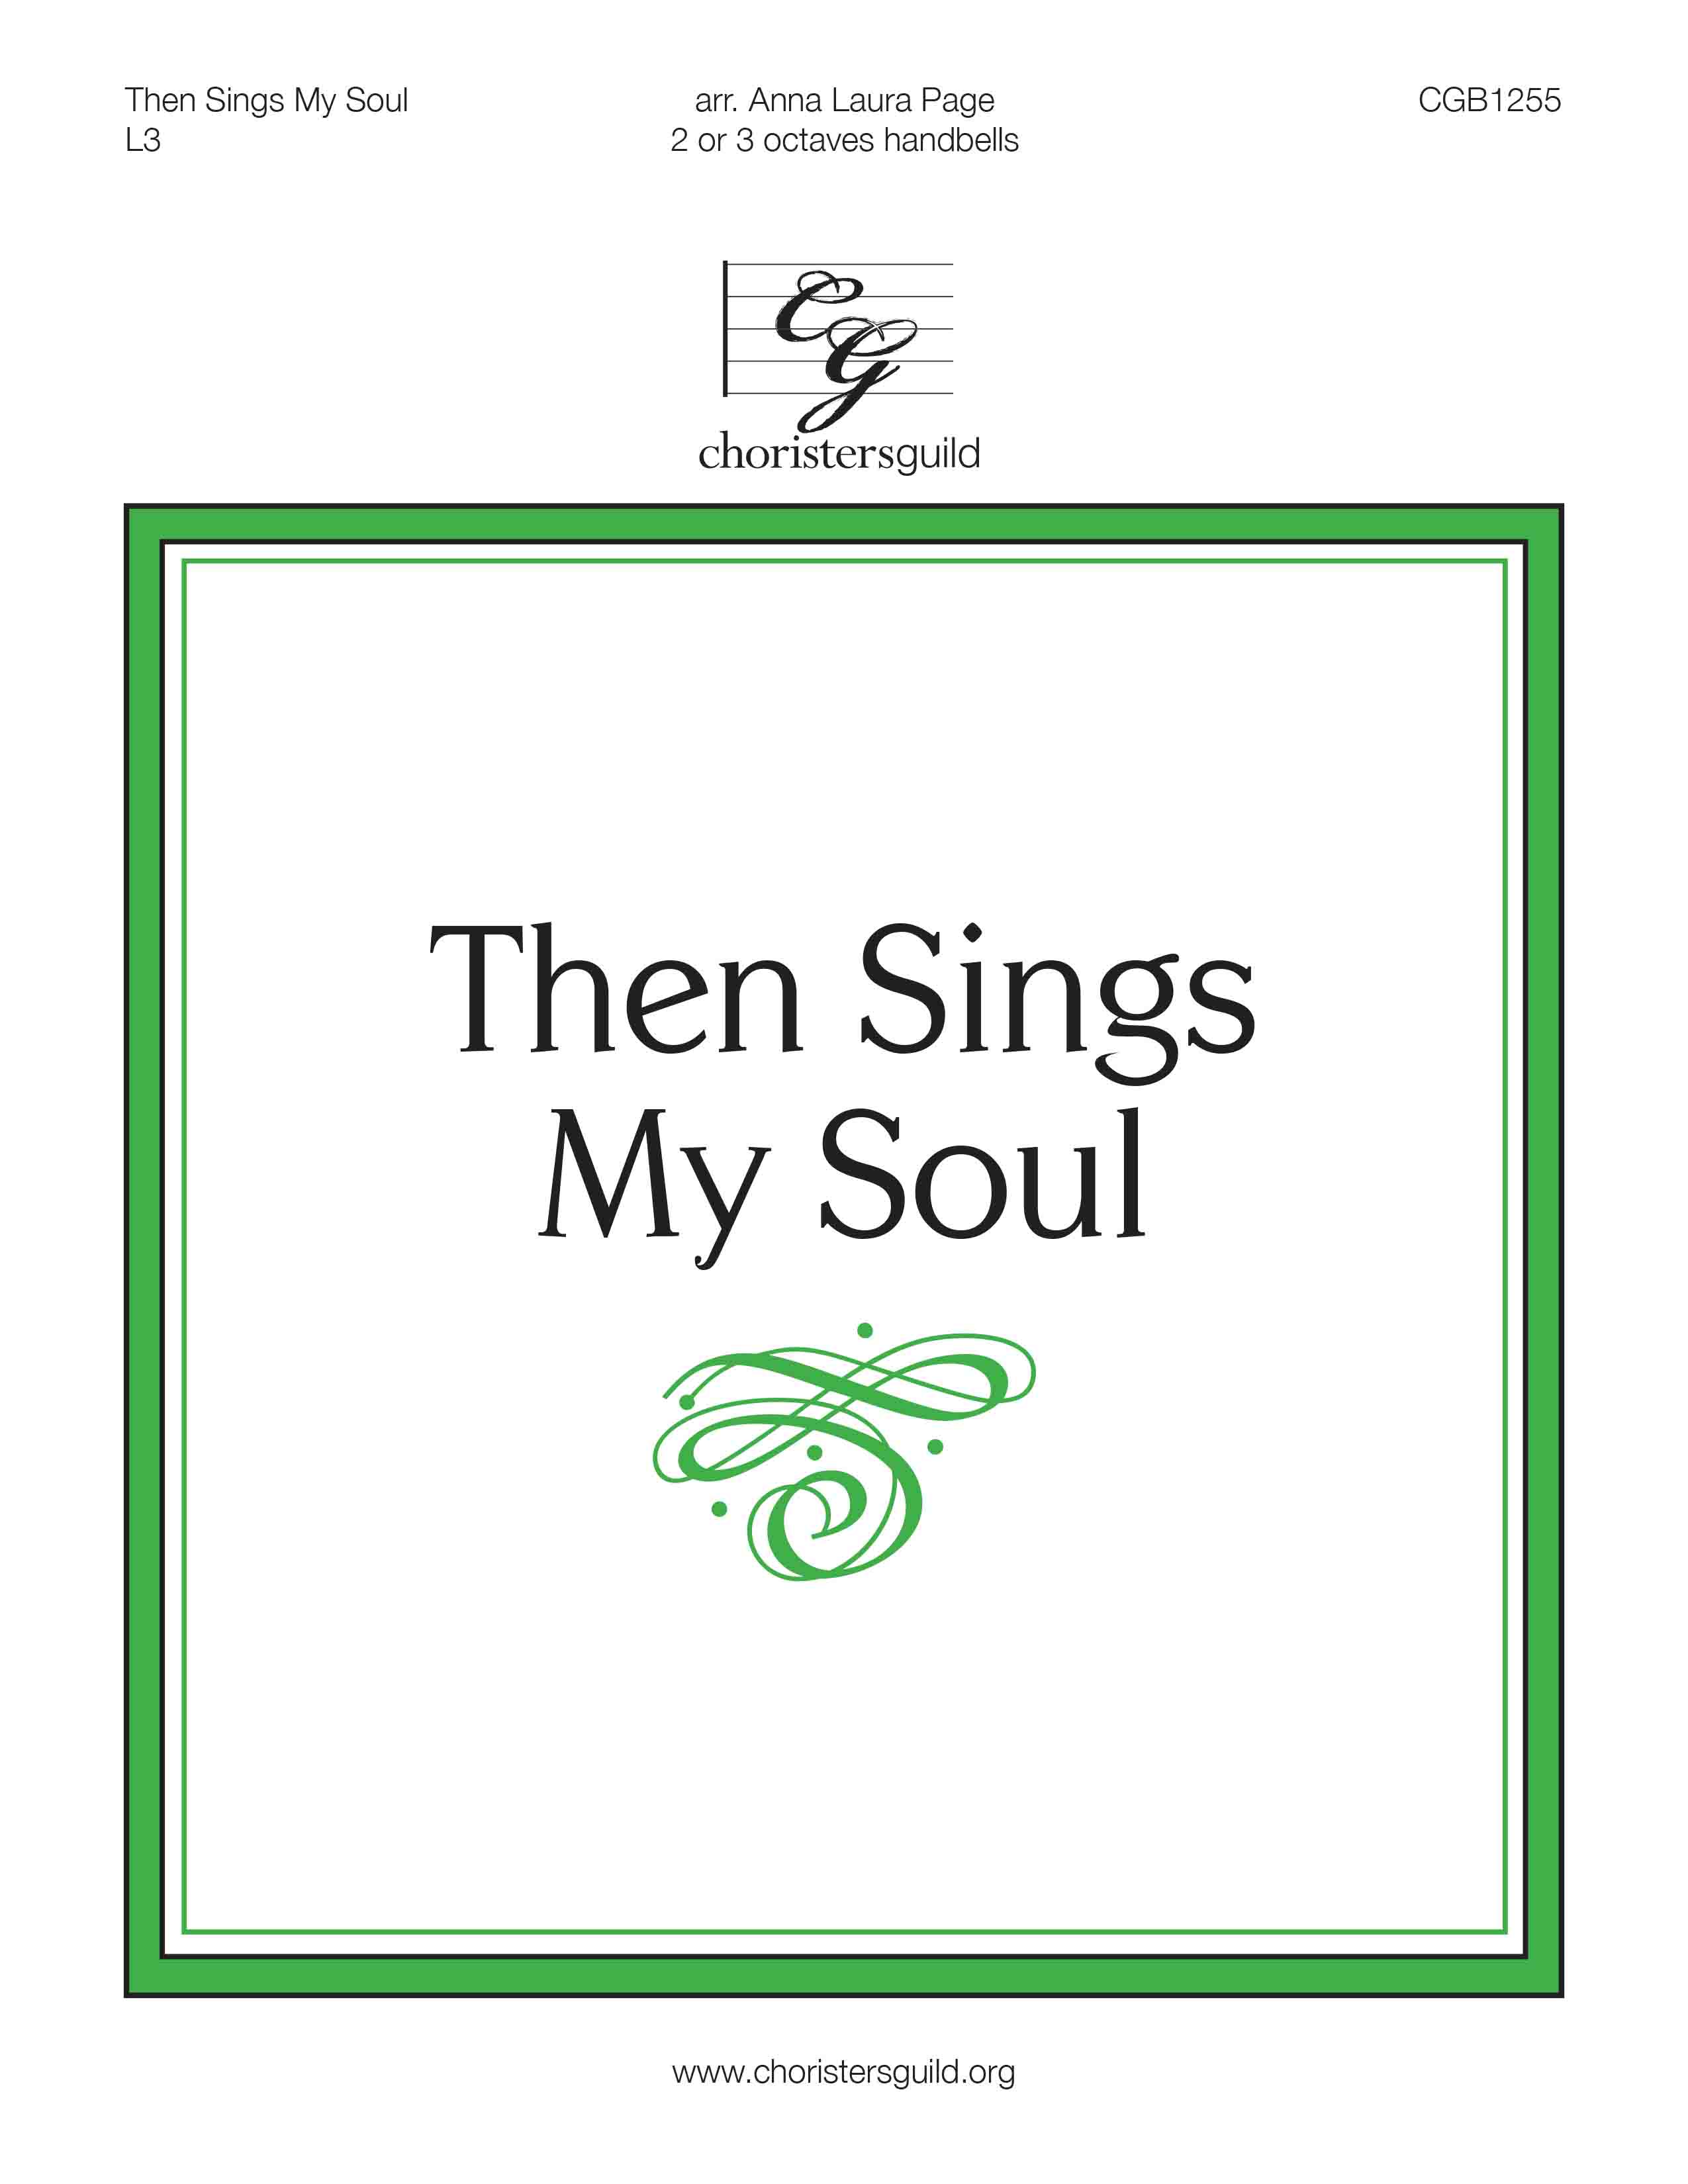 Then Sings My Soul (2 or 3 octaves)